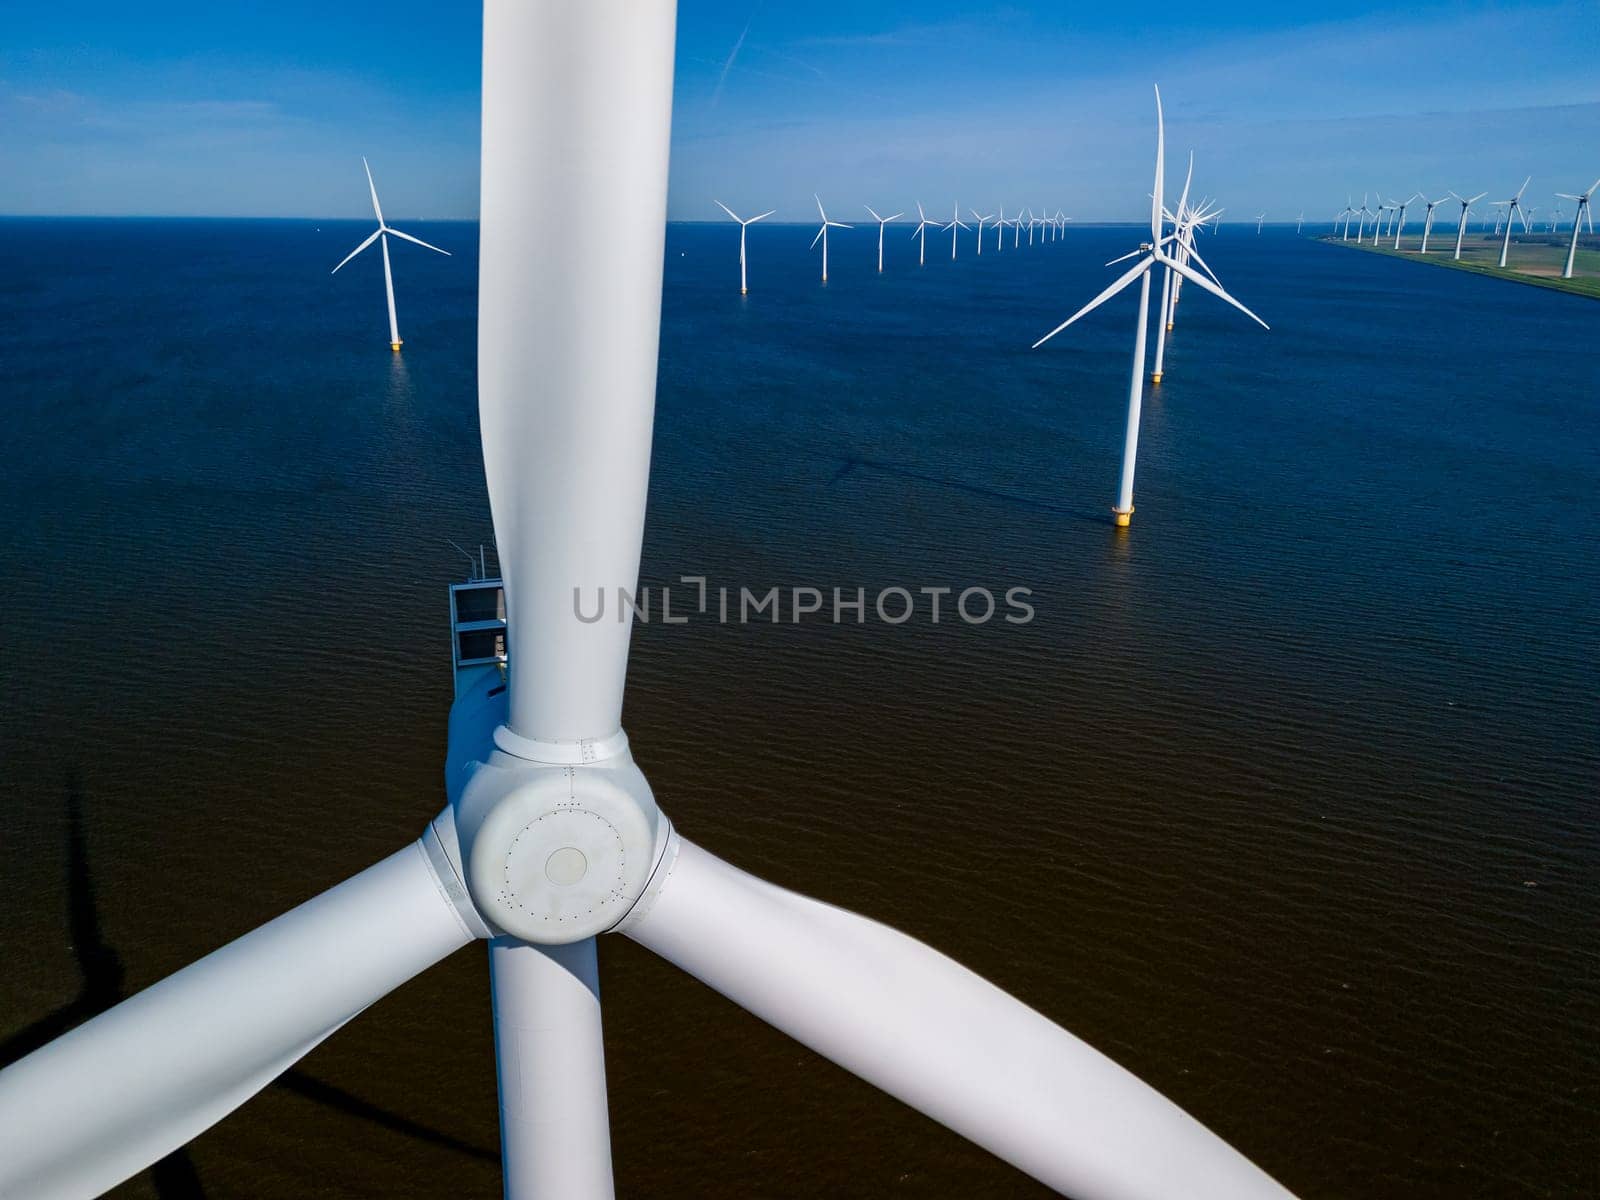 Serene wind farm in the ocean off the coast of Flevoland, Netherlands, with rows of majestic windmill turbines gracefully catching the spring breeze. windmill turbines green energy in the ocean